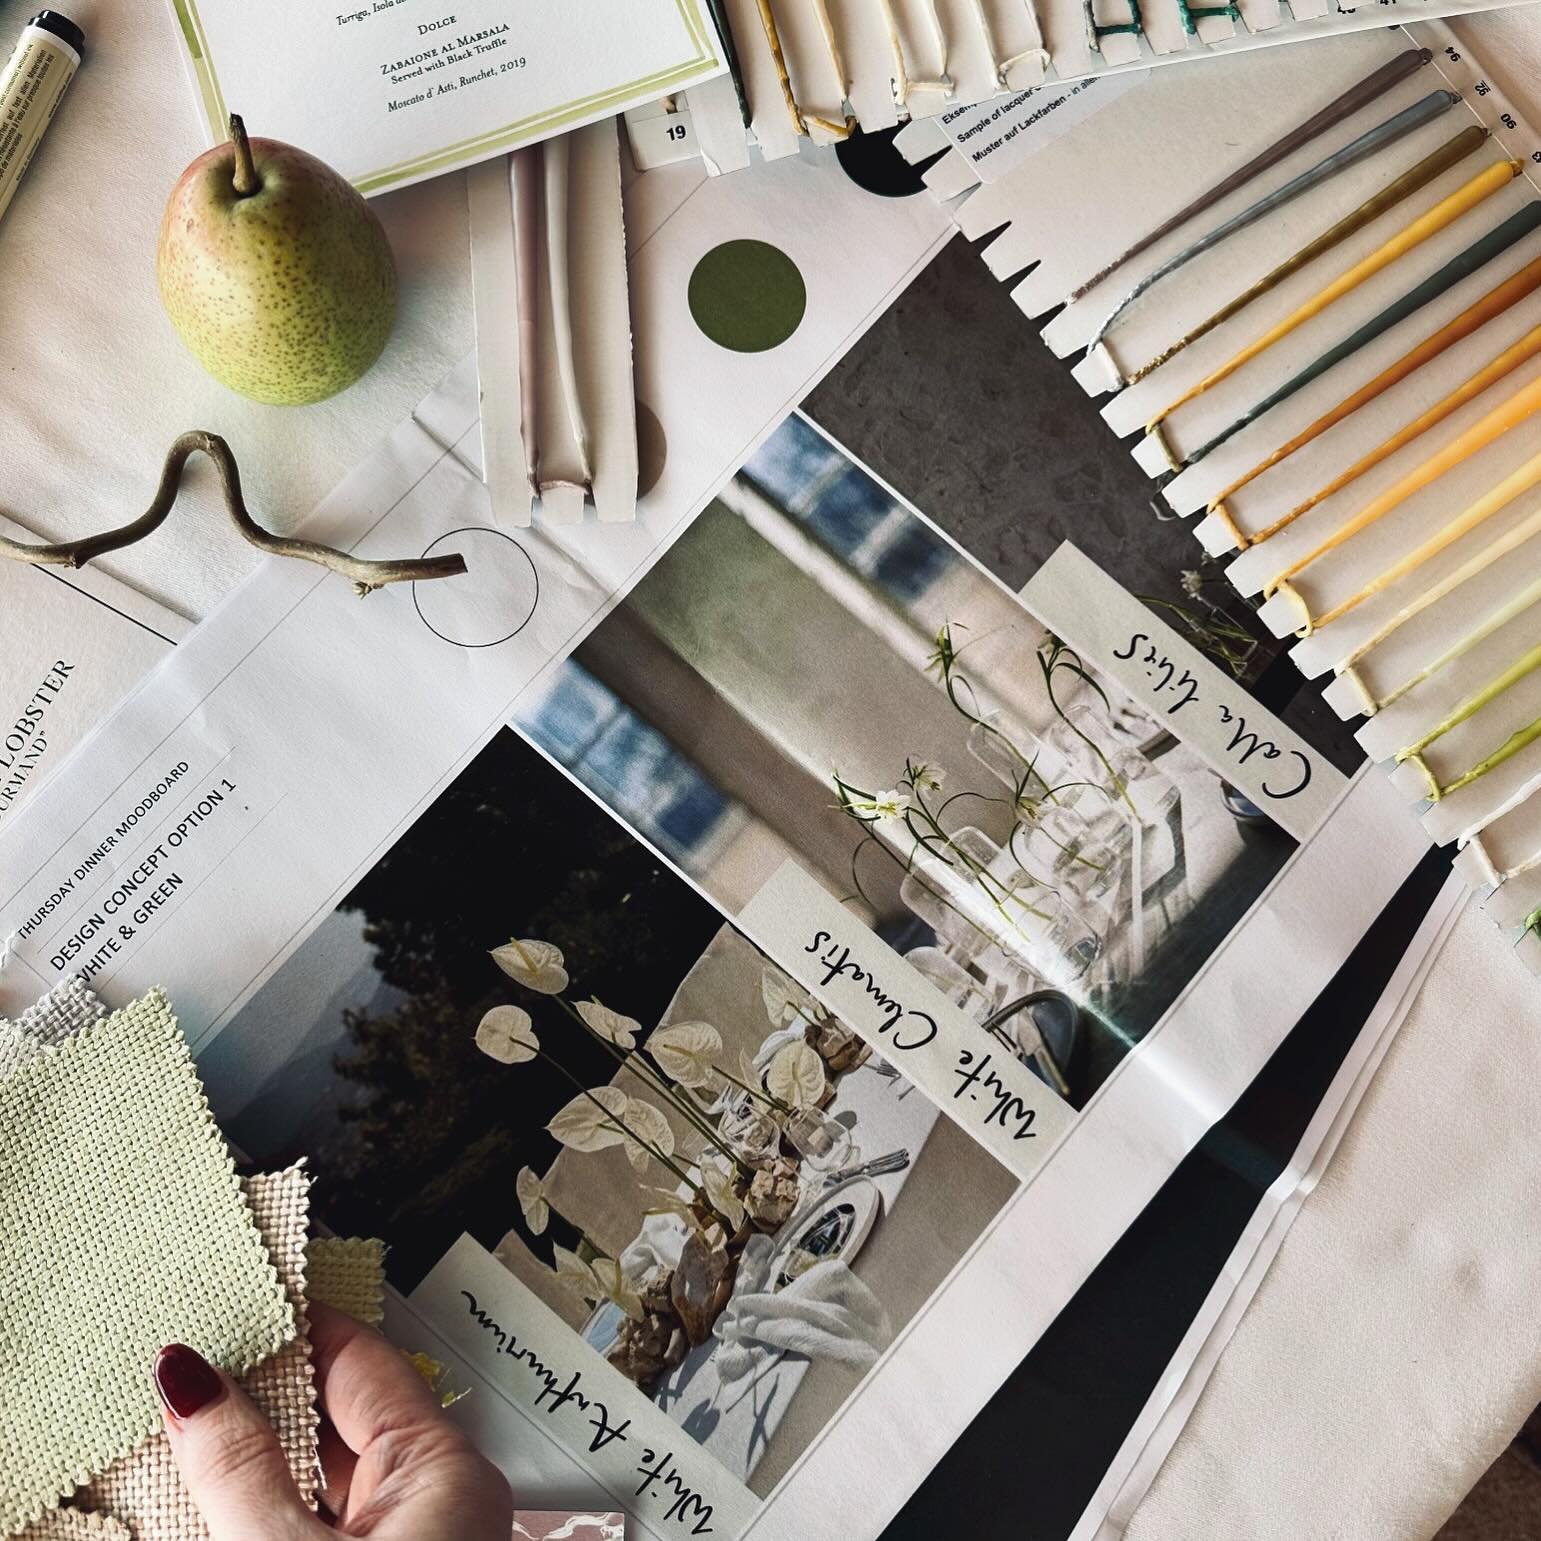 Our favourite part of the process, testing swatches &amp; colours&hellip;planning, devising &amp; dreaming up designs that make an event or table memorable.